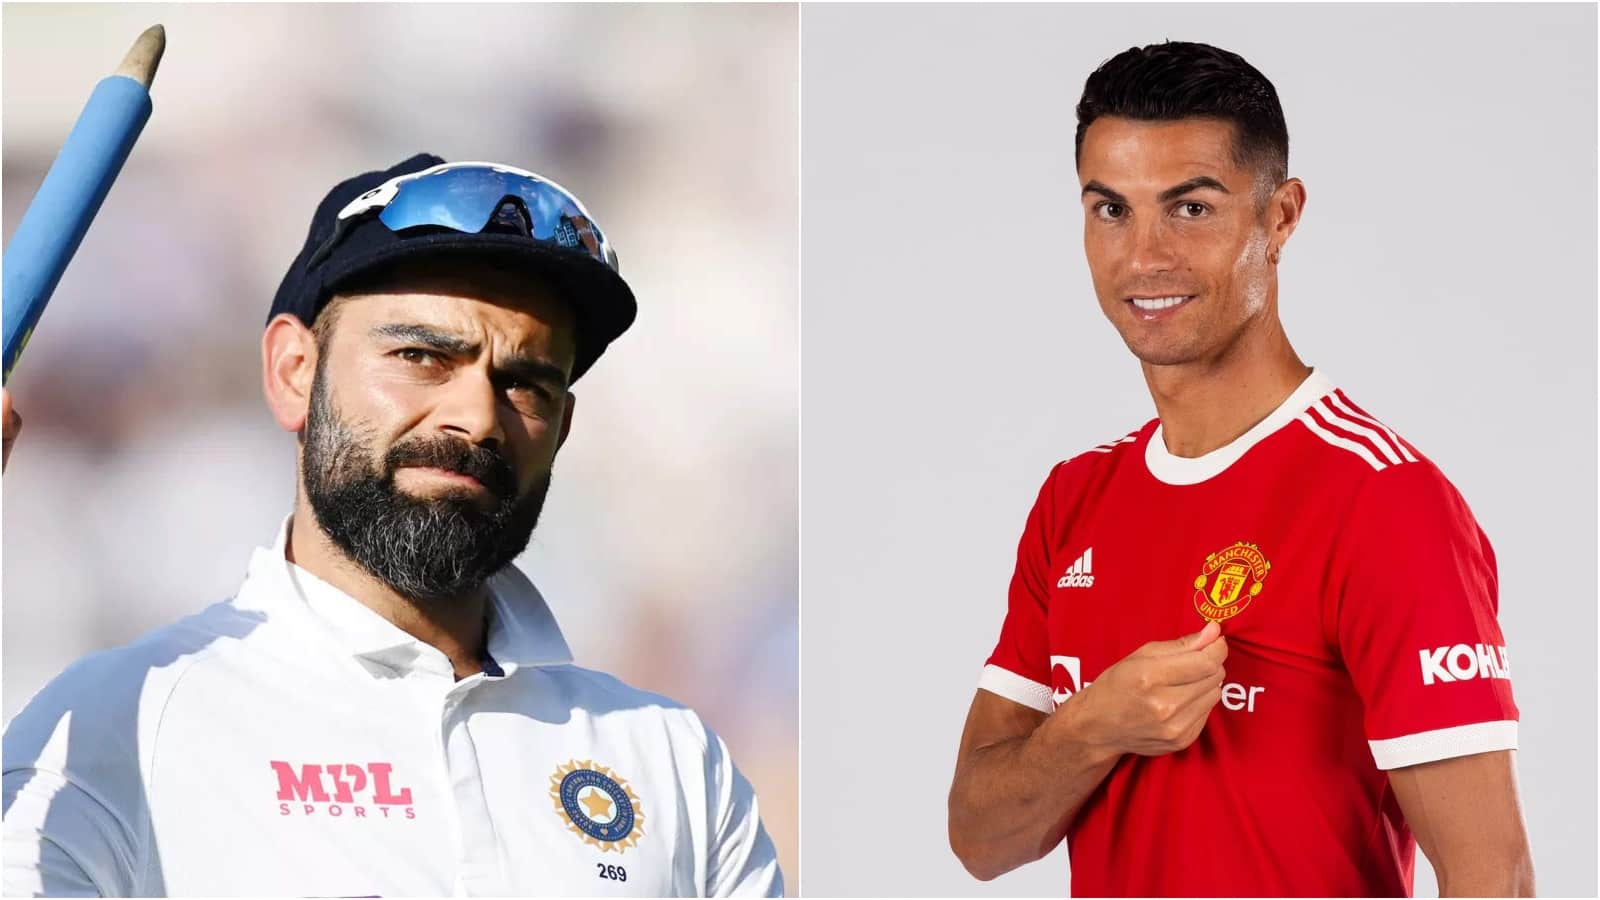 ENG vs IND 2021: Virat Kohli Likely To Meet Cristiano Ronaldo In Manchester: Reports